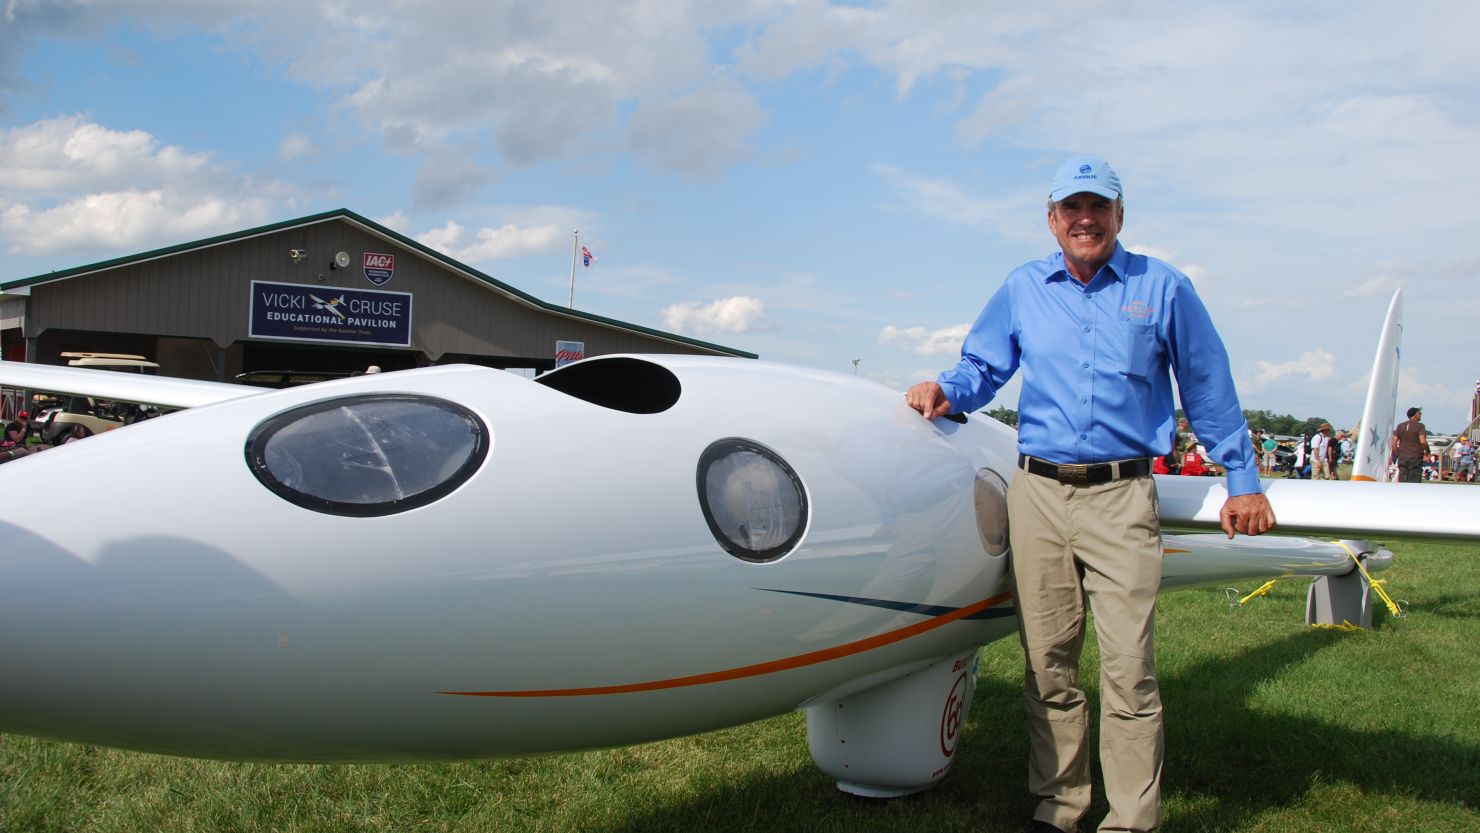 Jim Payne plans to fly this experimental glider to a record height of between 90,000 and 100,000 feet.